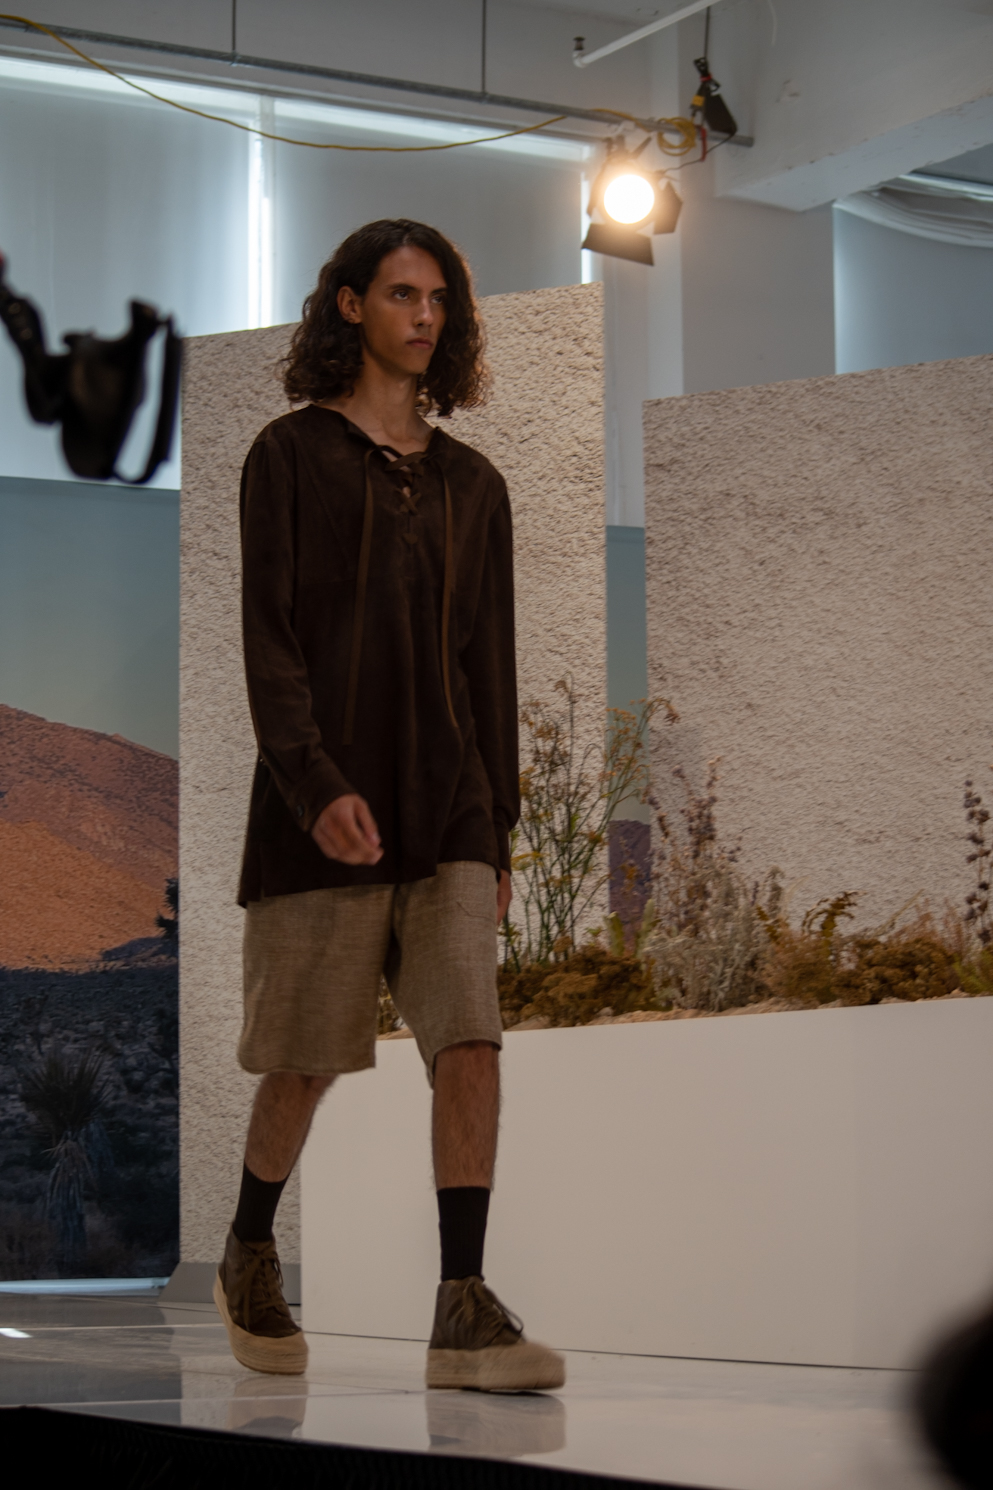 Emerging+menswear+finds+footing+at+New+York+Men%E2%80%99s+Day